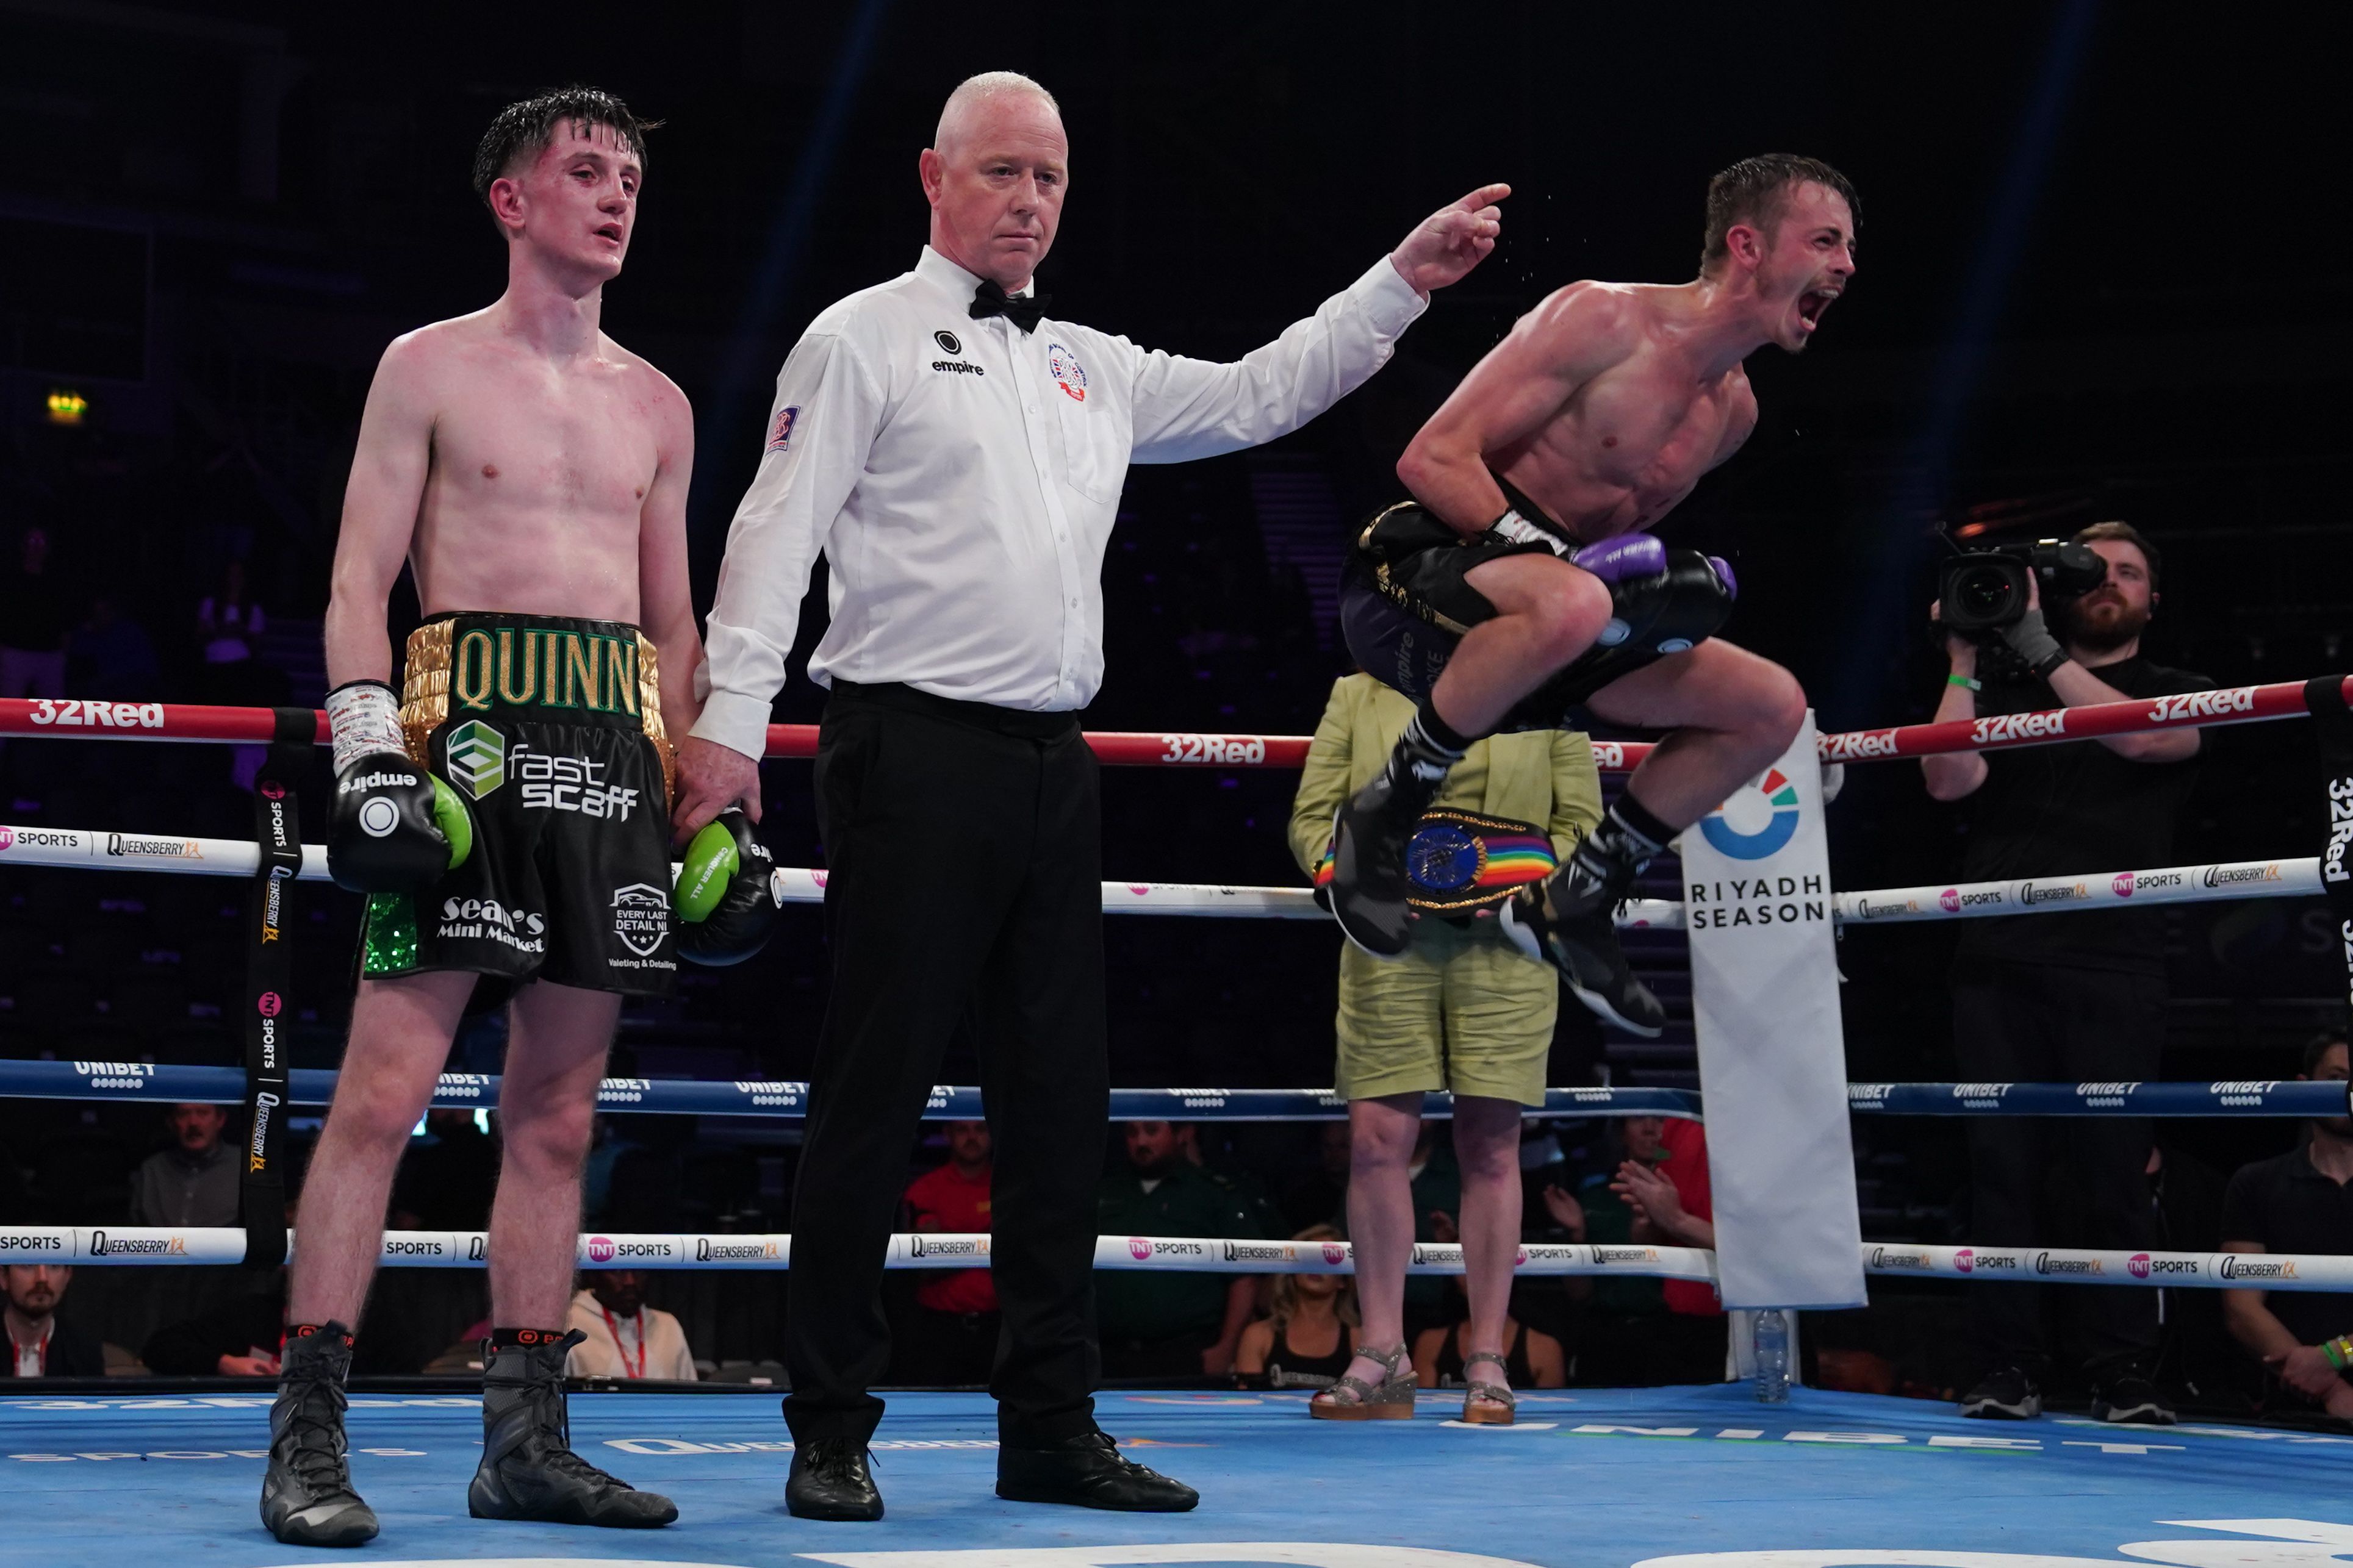 Contrasting emotions at the verdict as Conner Kelsall had his hand raised with Conor Quinn left disappointed